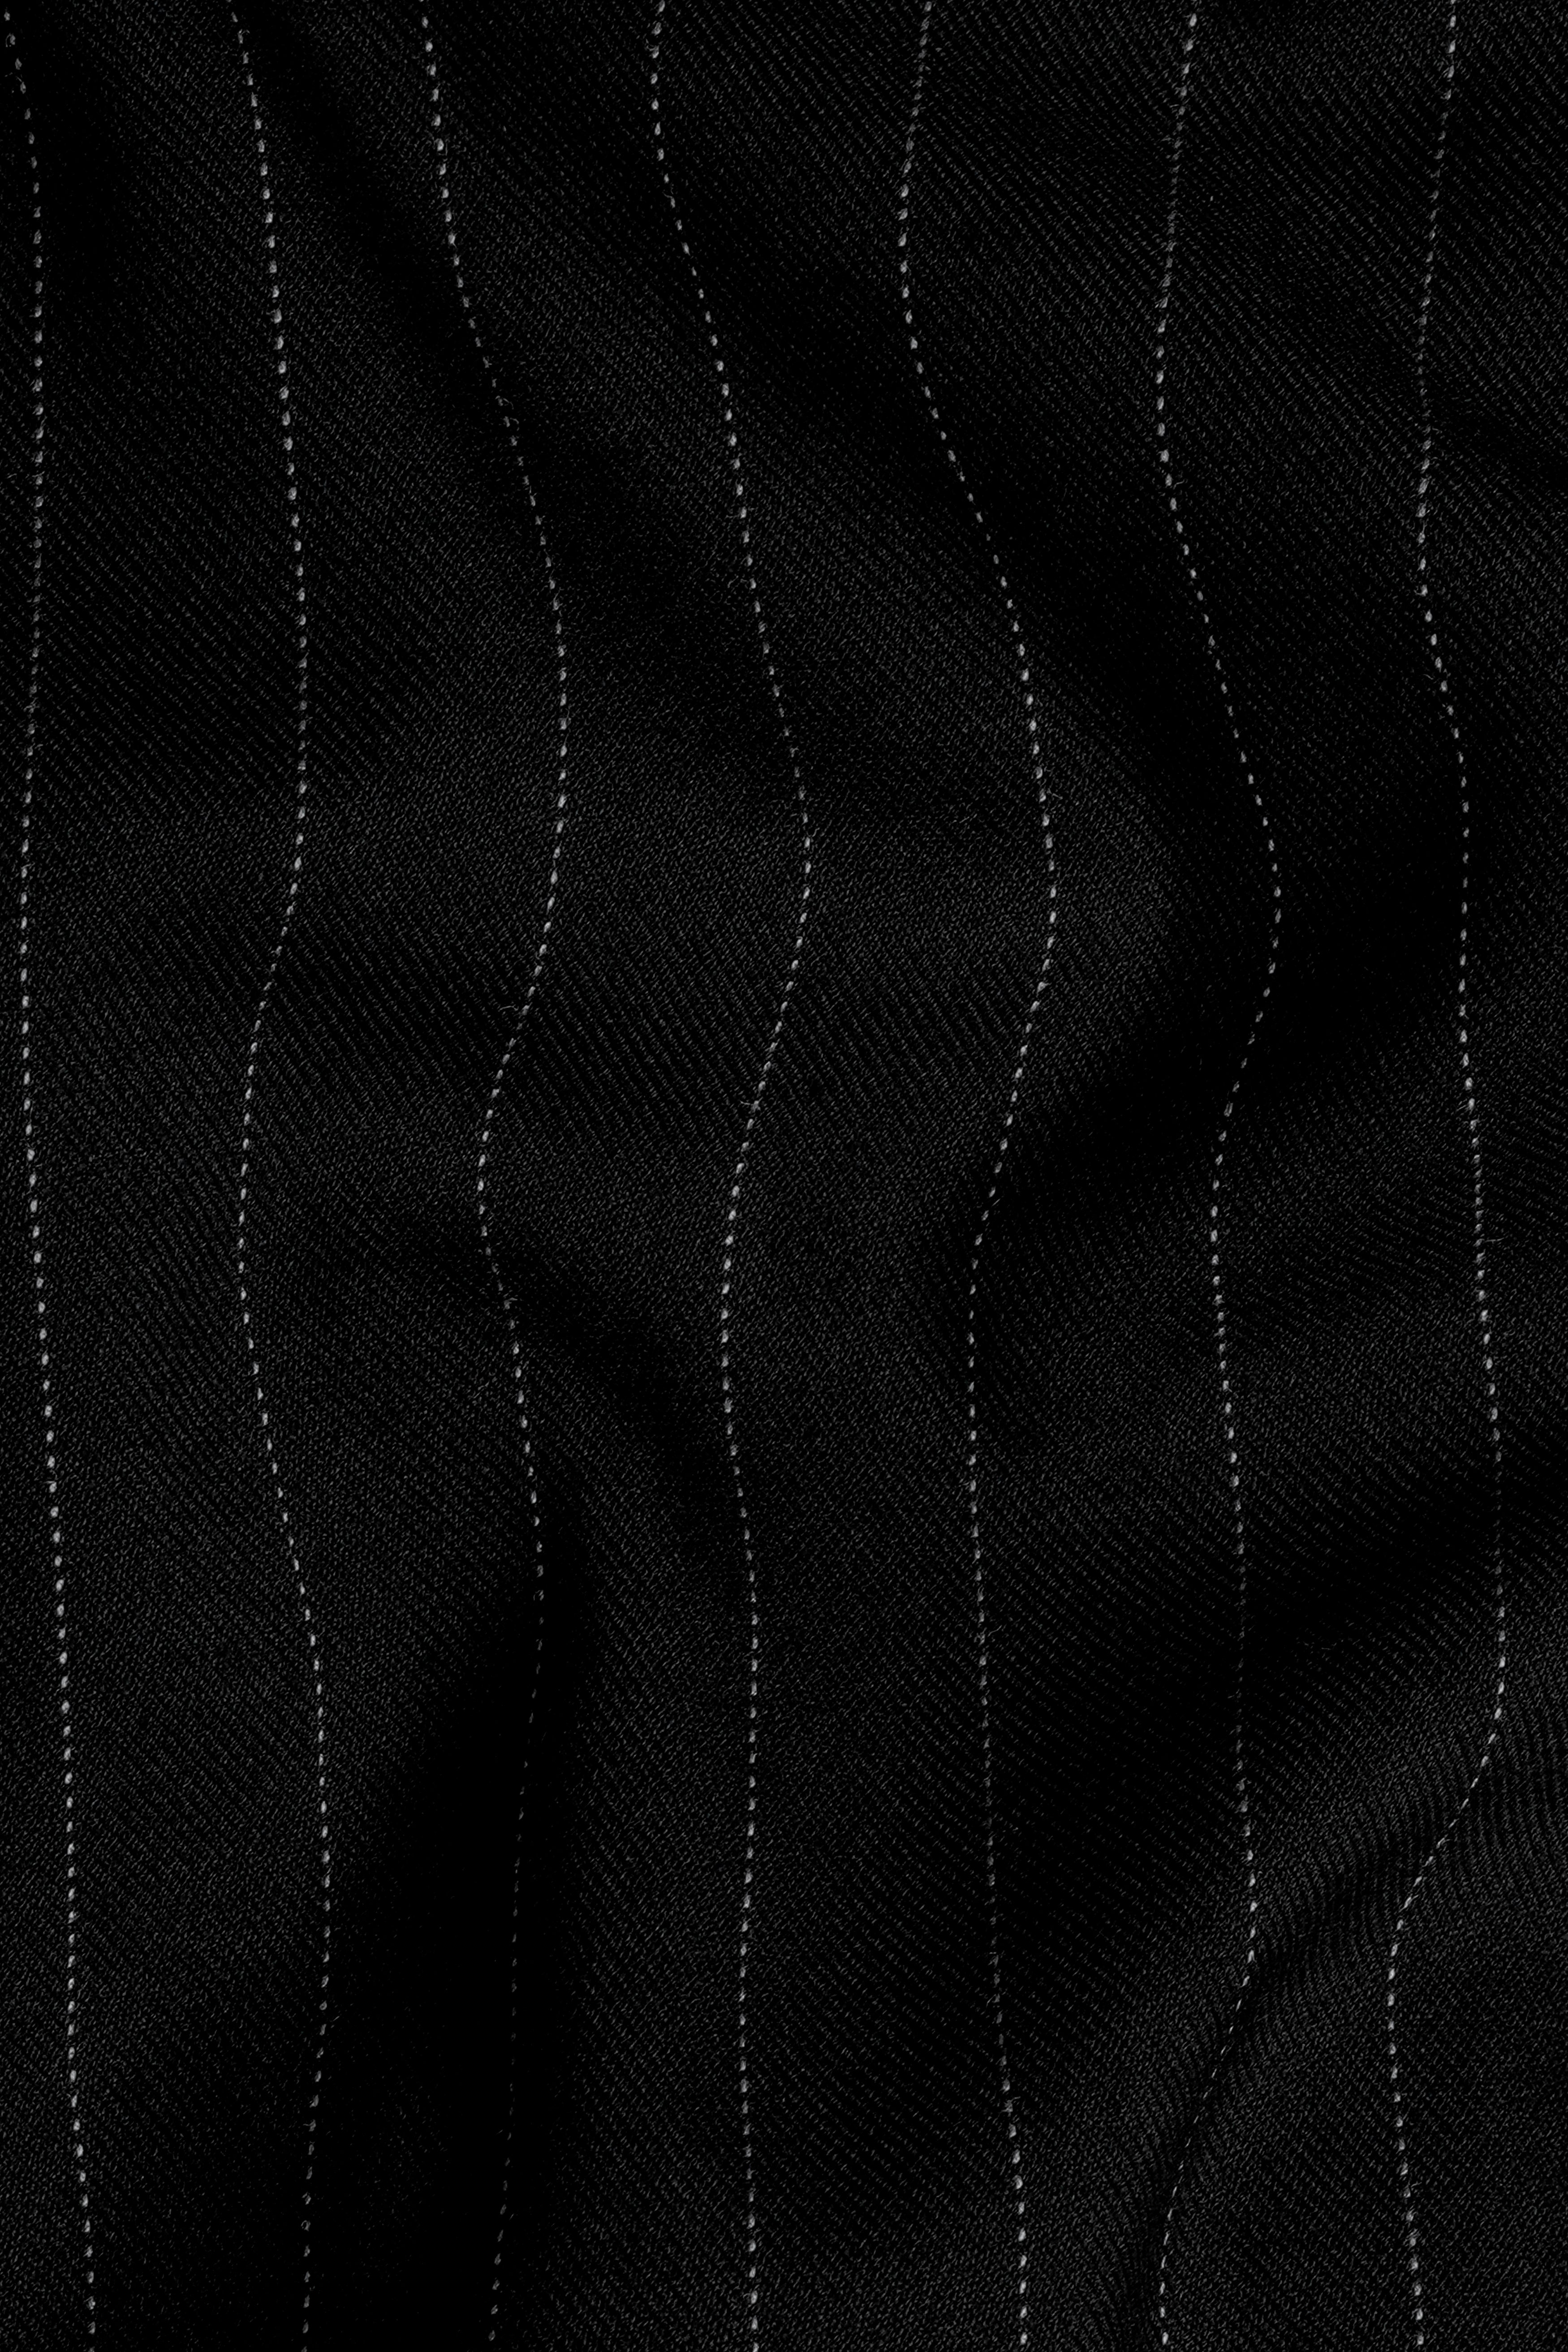 Jade Black and White Pin Striped Wool Rich Double Breasted Blazer BL3123-DB-36, BL3123-DB-38, BL3123-DB-40, BL3123-DB-42, BL3123-DB-44, BL3123-DB-46, BL3123-DB-48, BL3123-DB-50, BL3123-DB-52, BL3123-DB-54, BL3123-DB-56, BL3123-DB-58, BL3123-DB-60